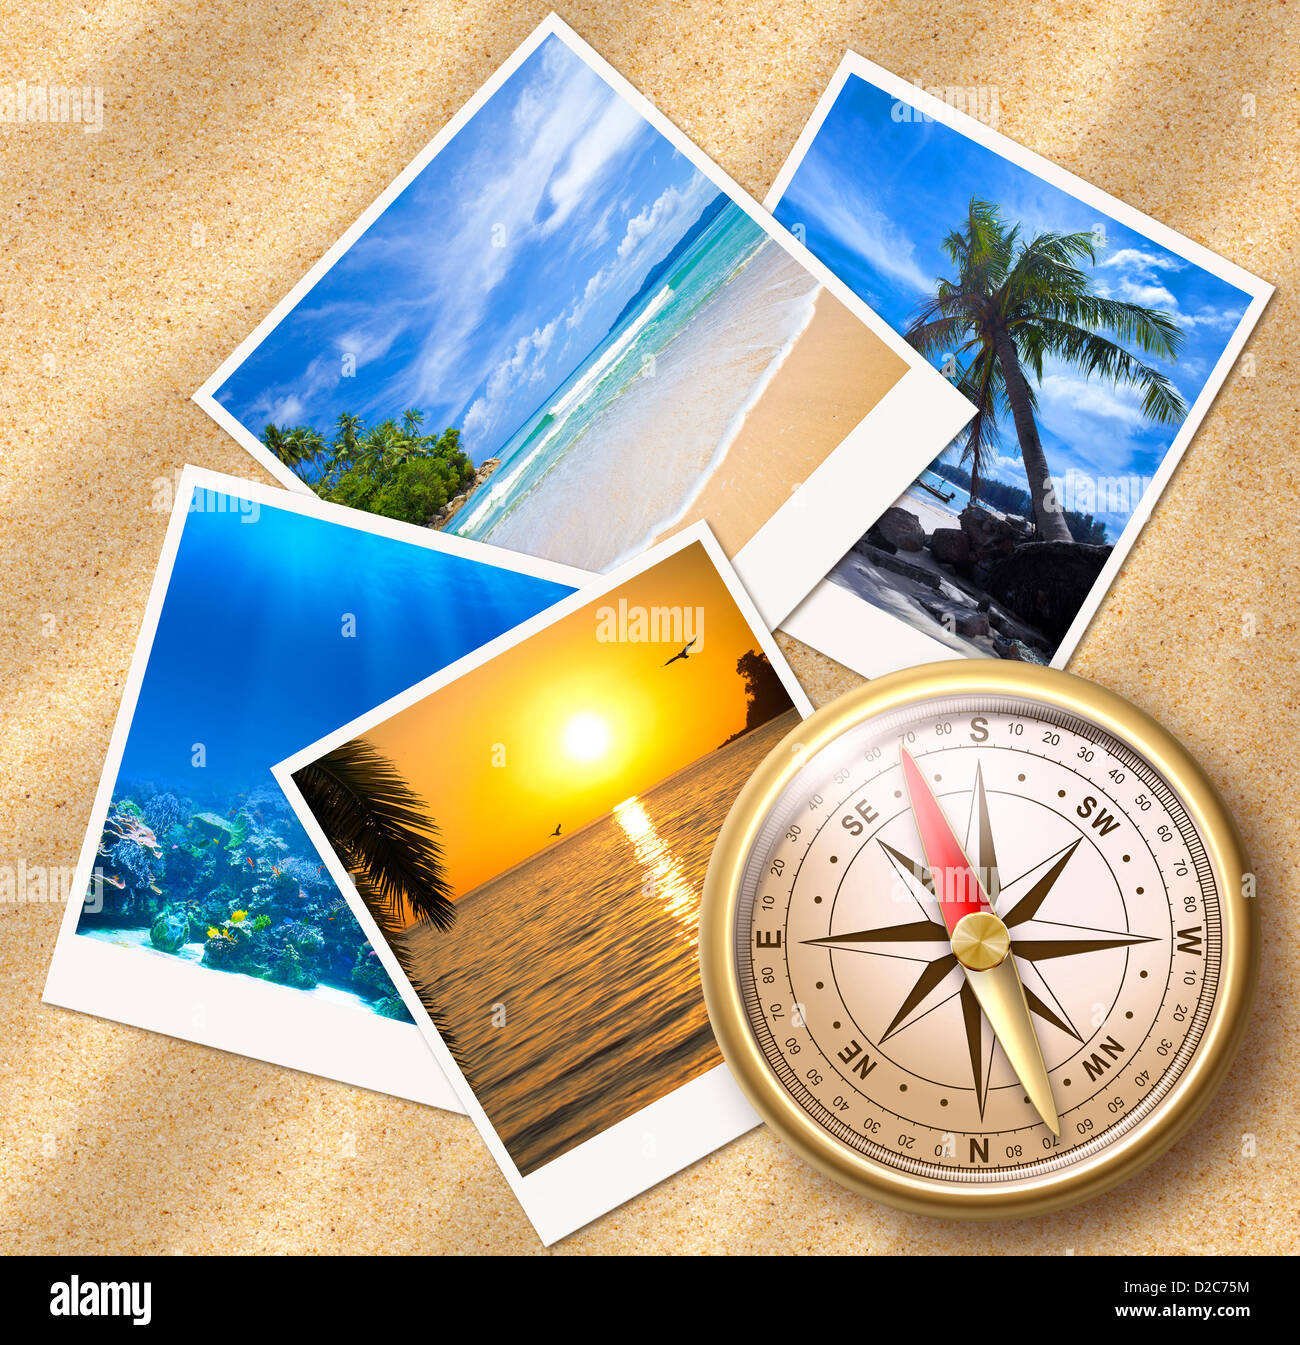 Traveling photos with compass on sand beach Stock Photo